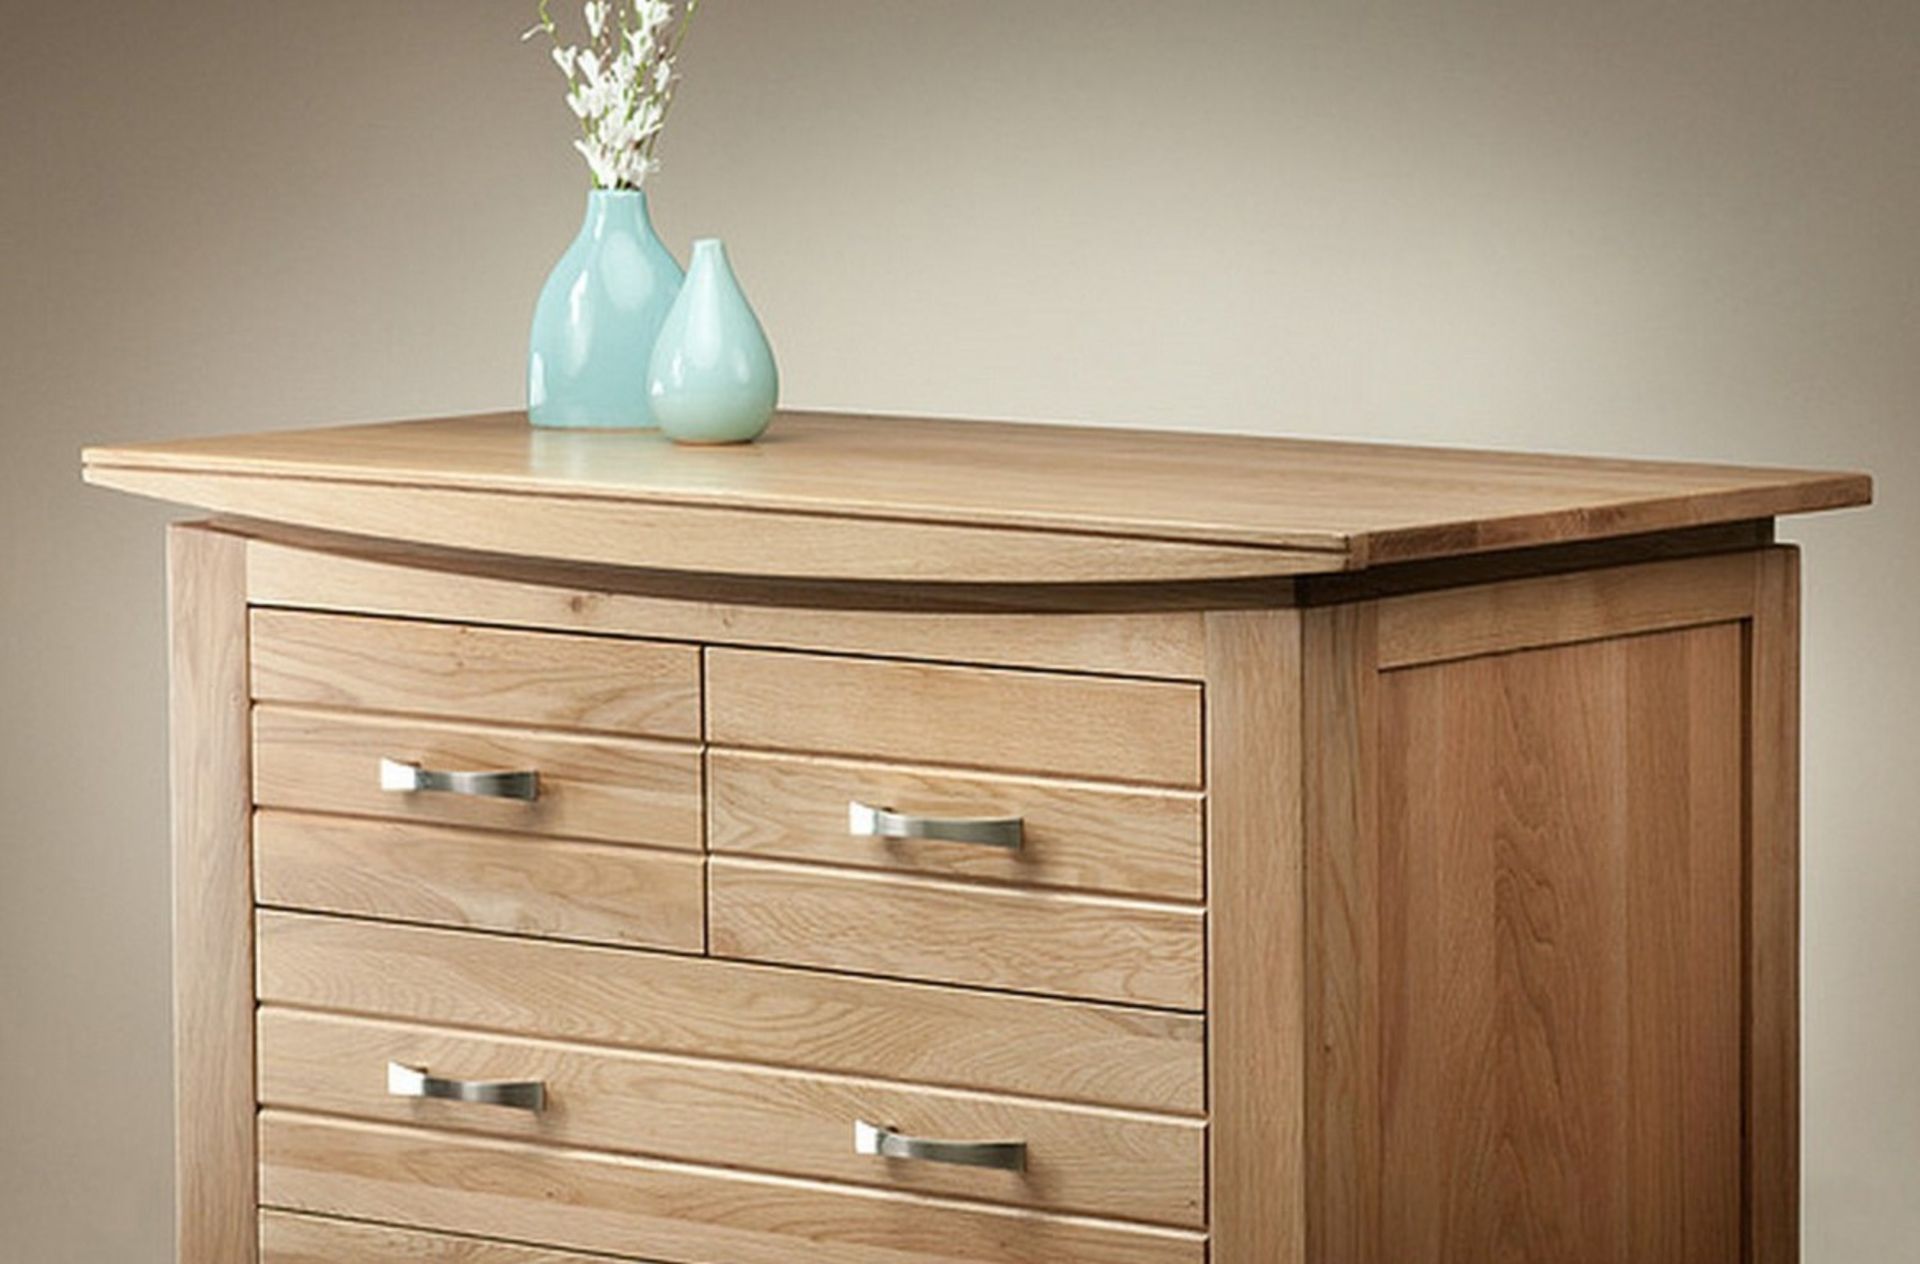 1 x Matlock Solid Oak 2 Over 2 Chest of Drawers - MADE FROM 100% AMERICAN SOLID OAK - CL112 - New, - Image 2 of 2